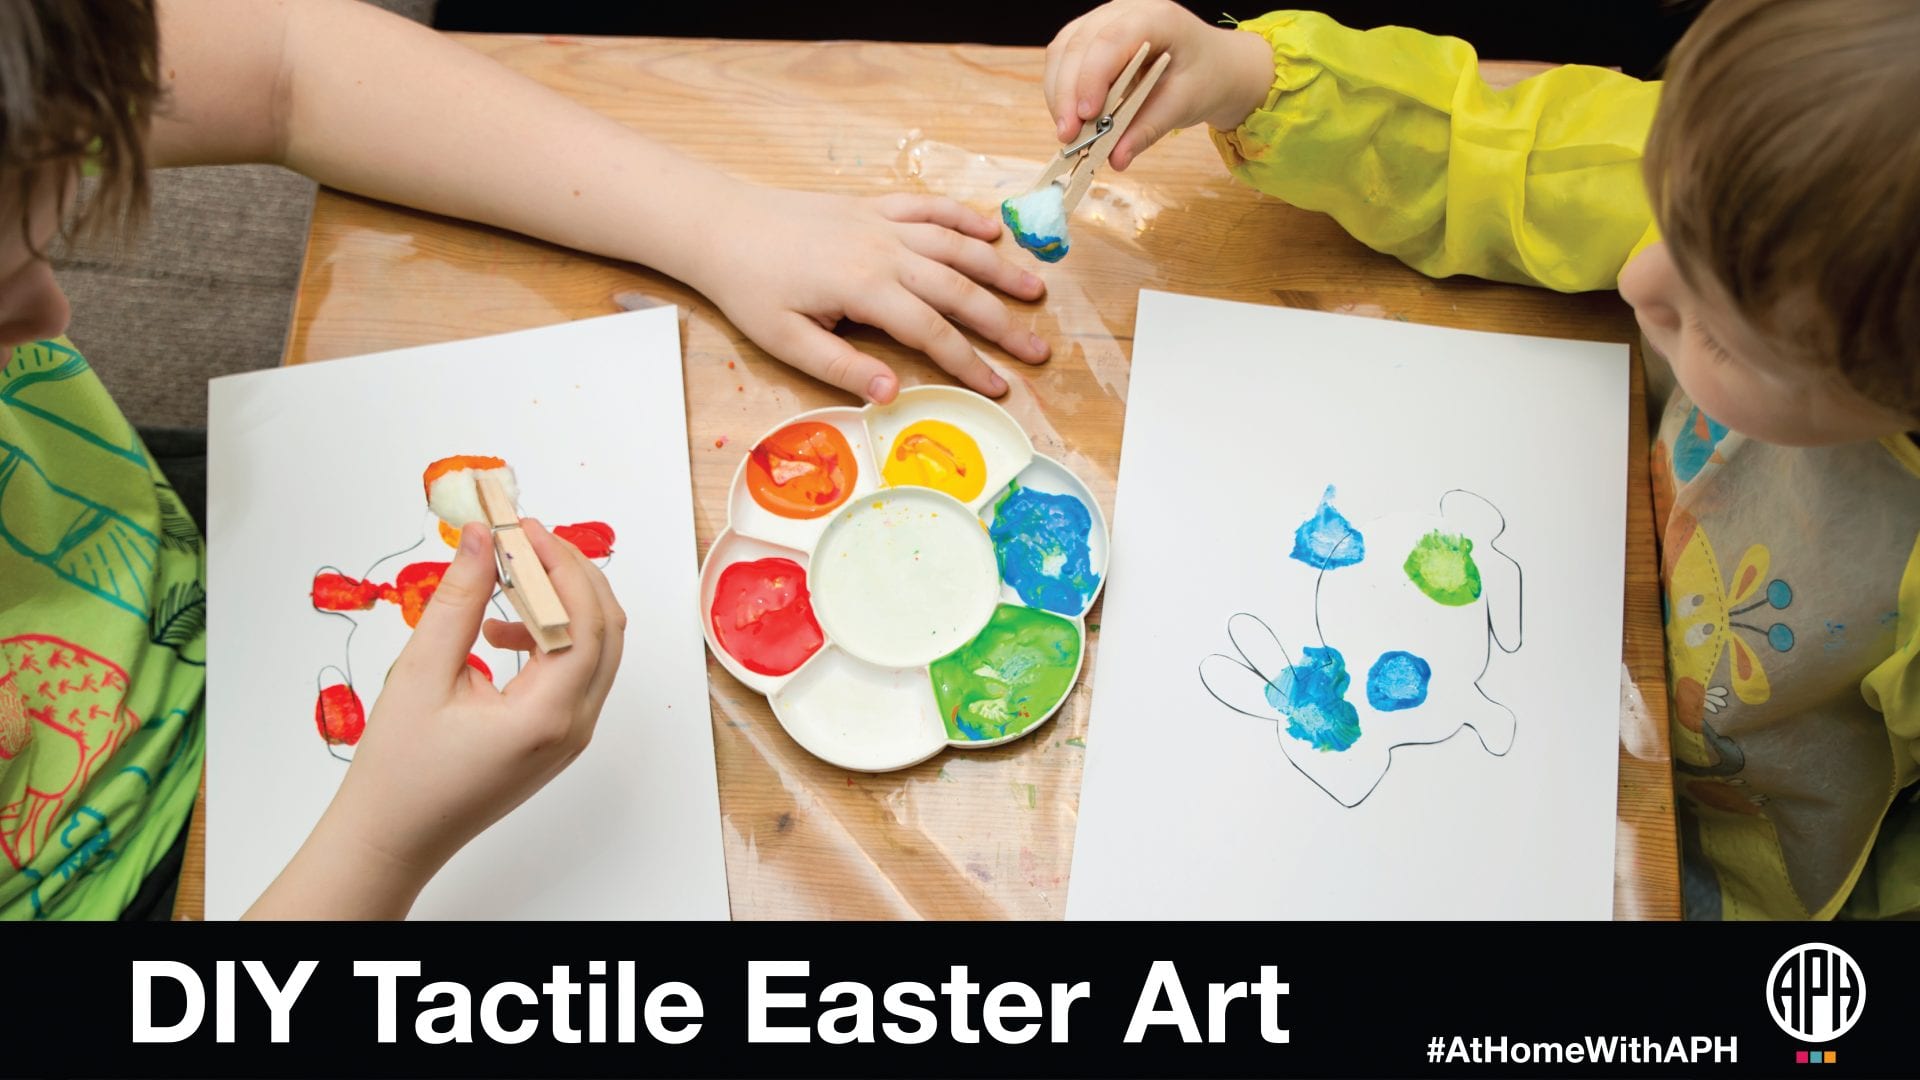 two kids painting black outline drawings of bunnies. text reads "DIY Tactile Easter Art. #AtHomeWithAPH" APH logo